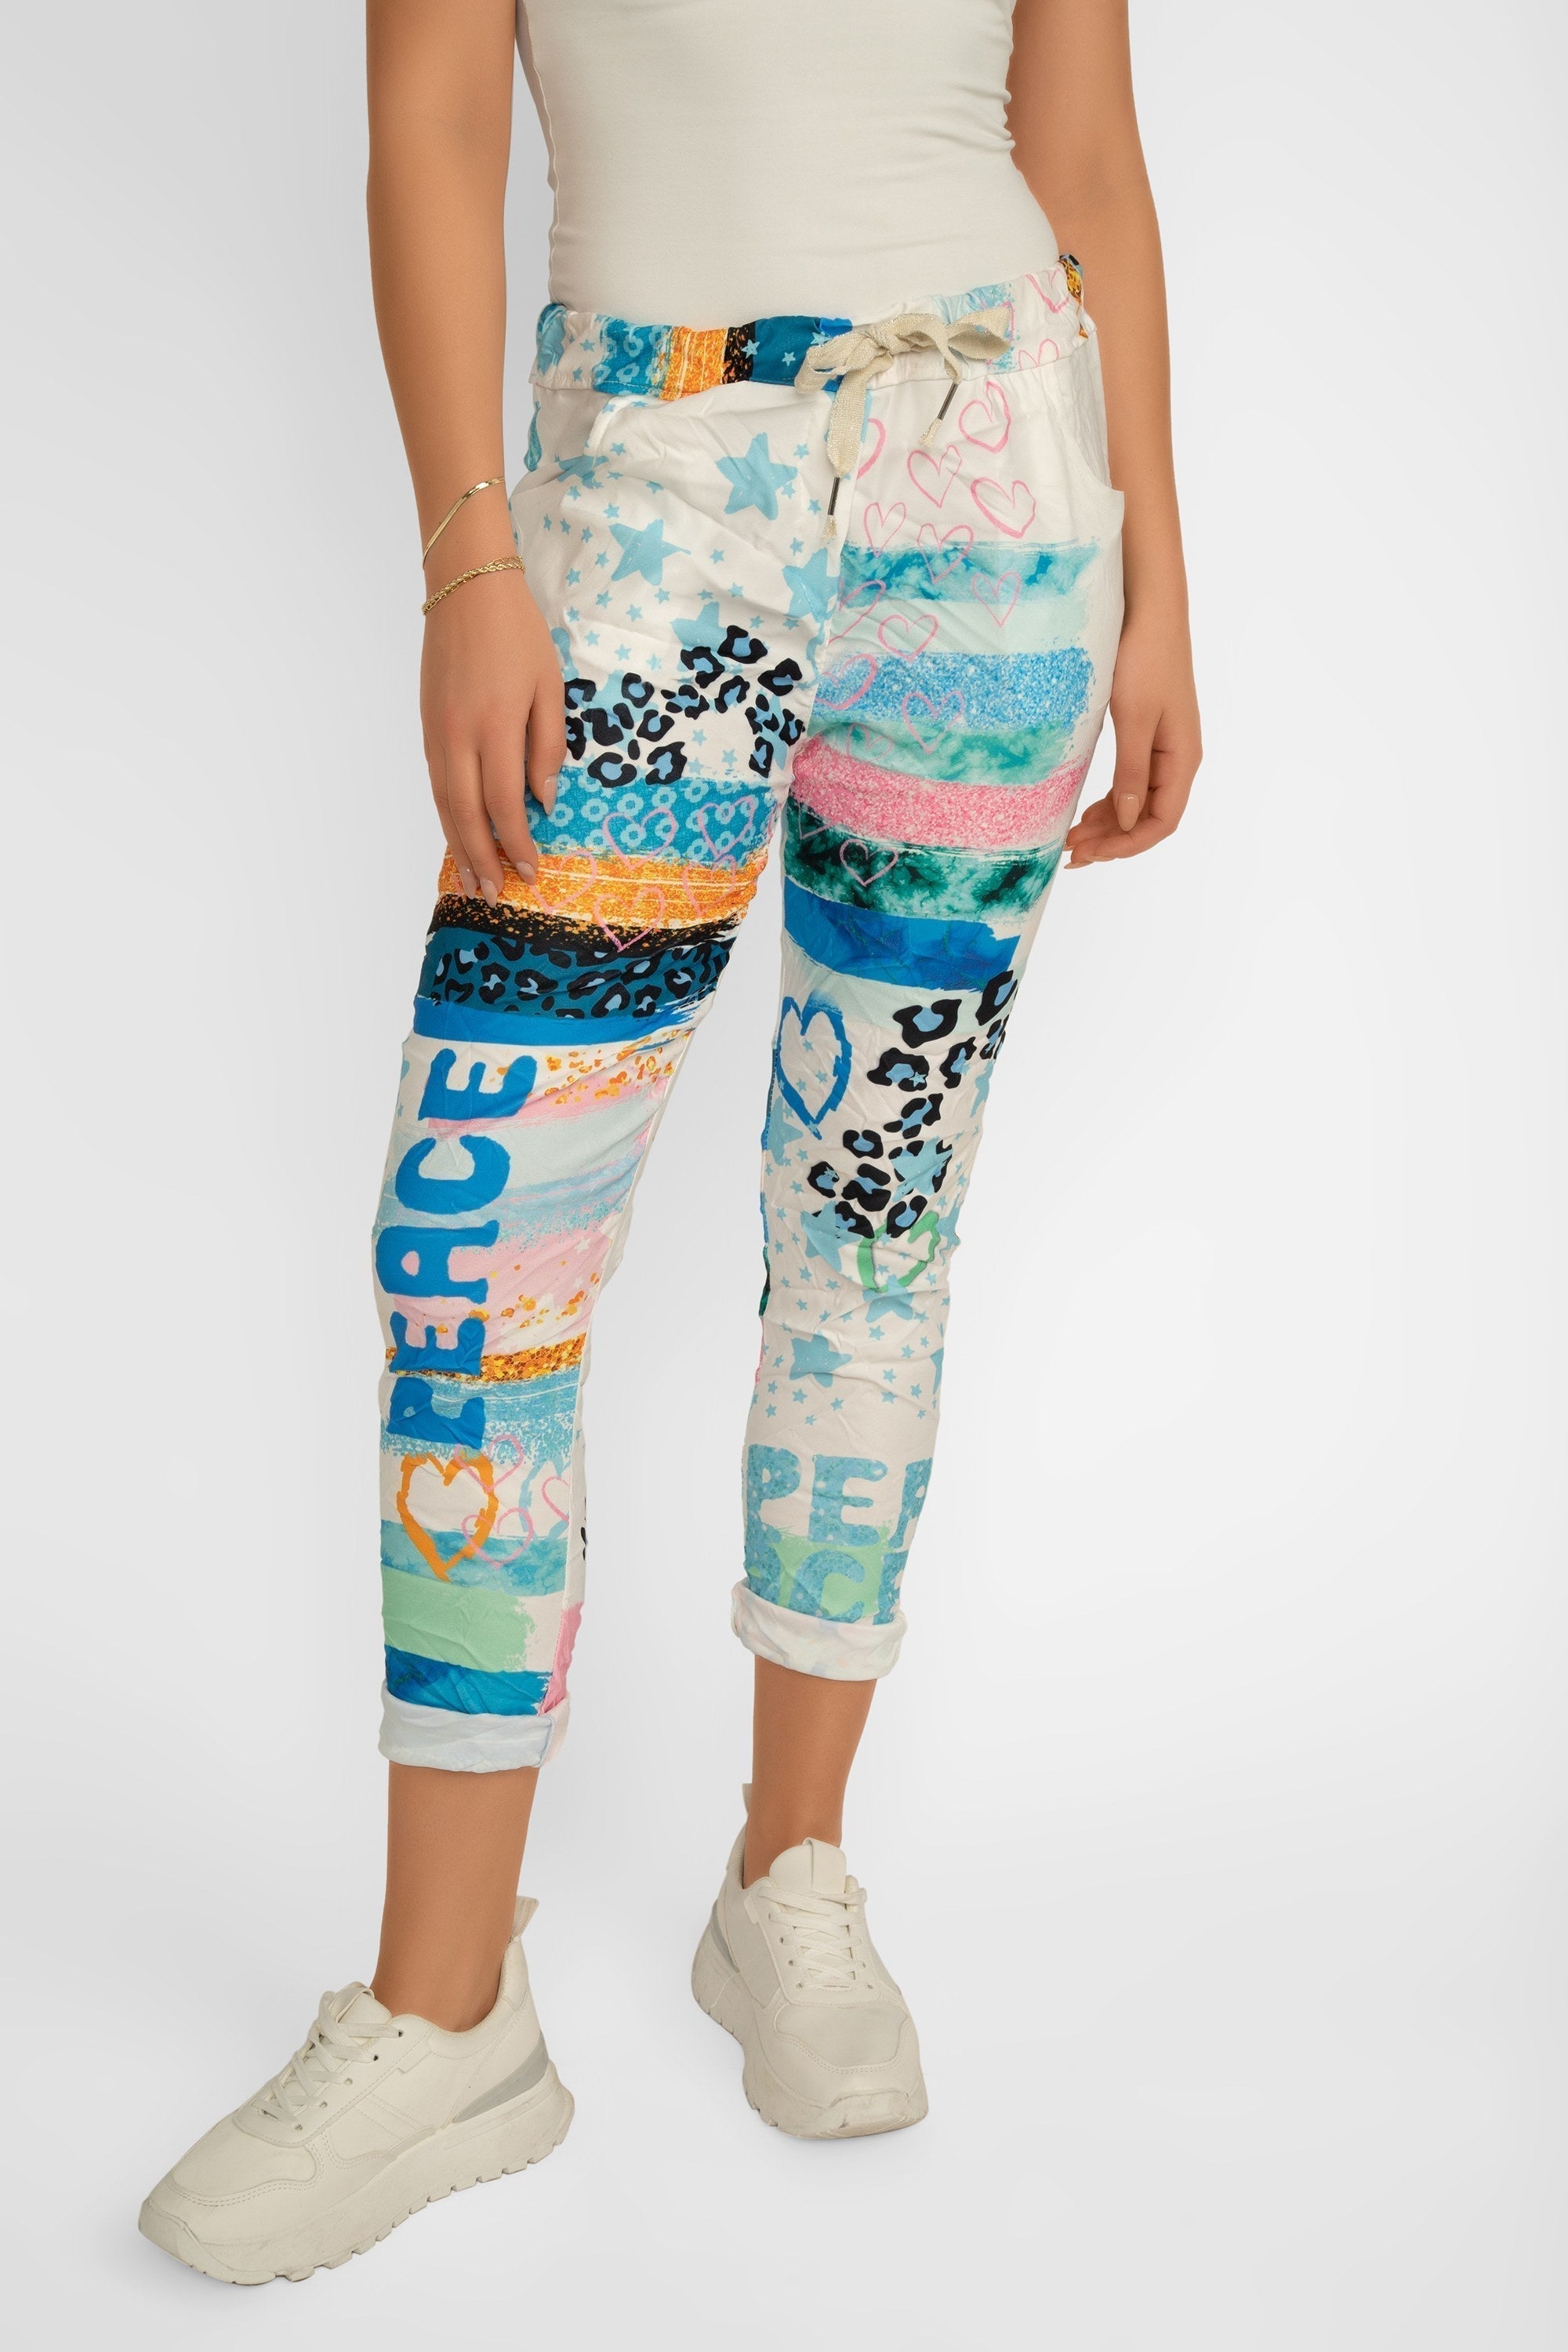 Bella Amore Women's Cropped Multi Print Pull-On Pants in a Blue and multi-coloured patchwork print